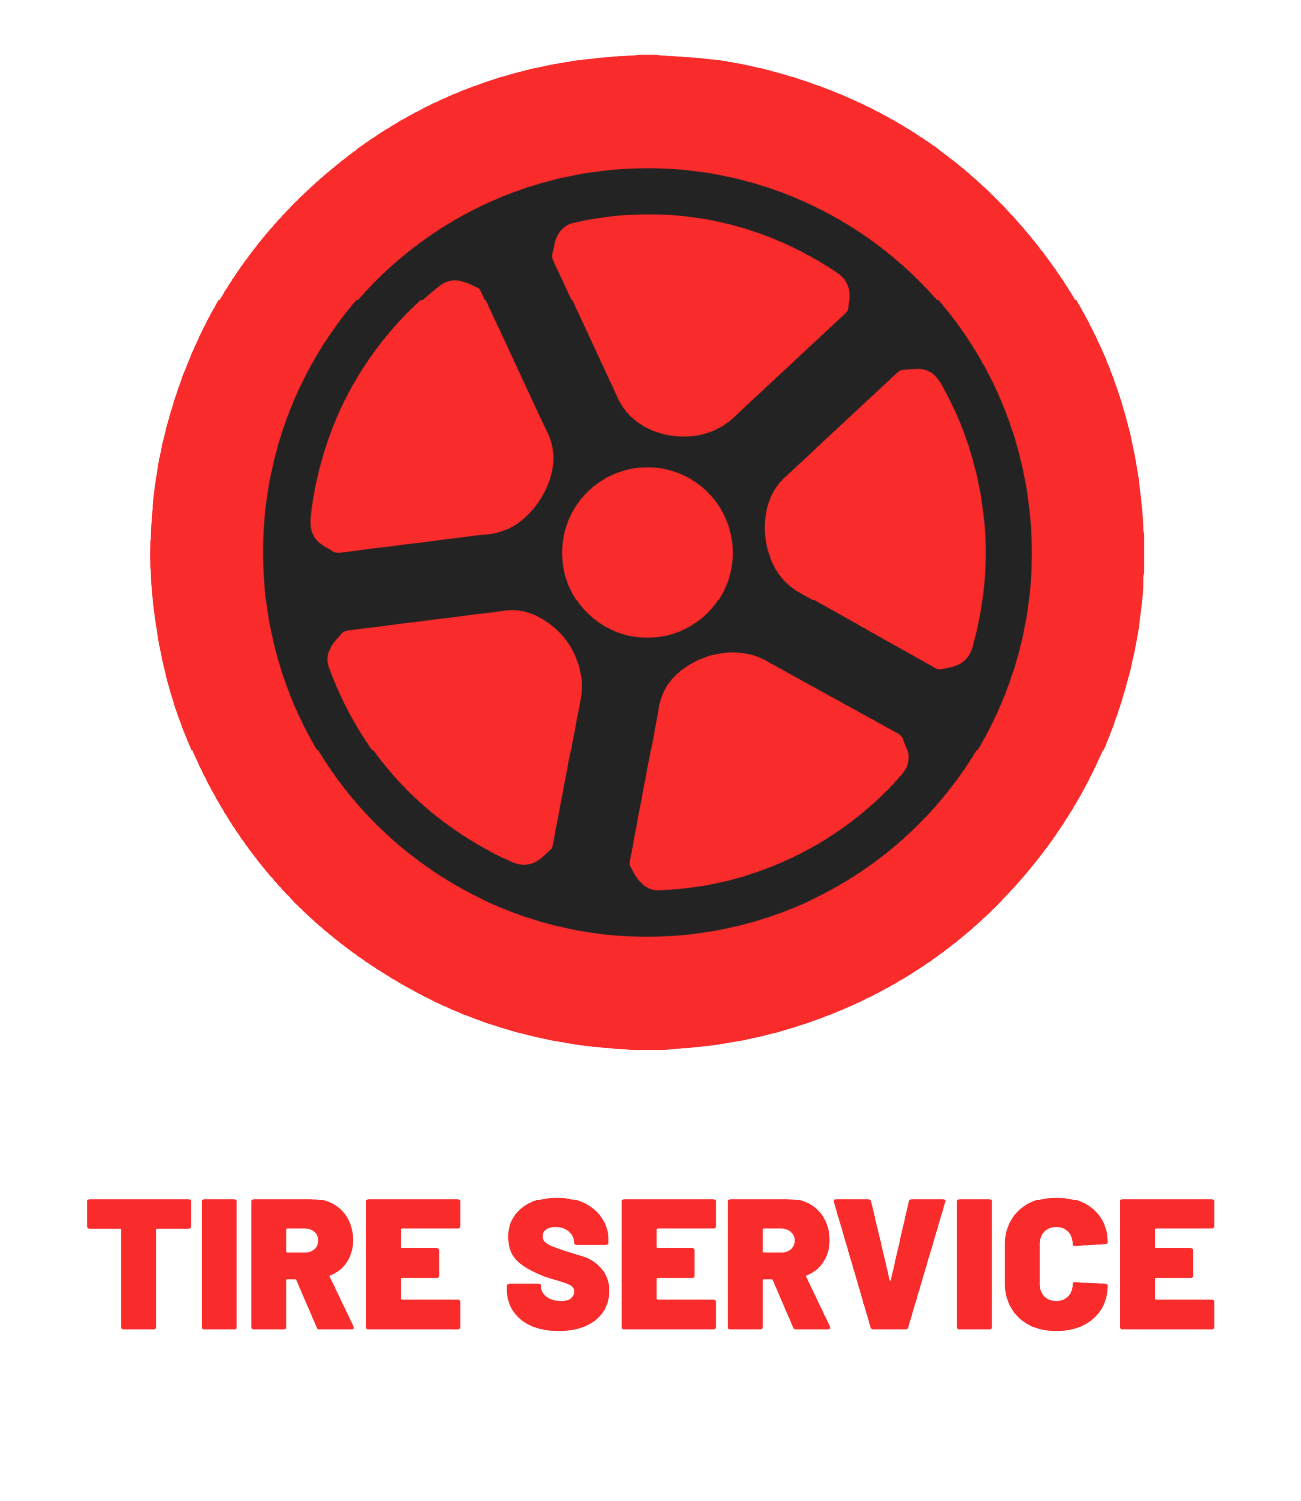 Learn more about tire services